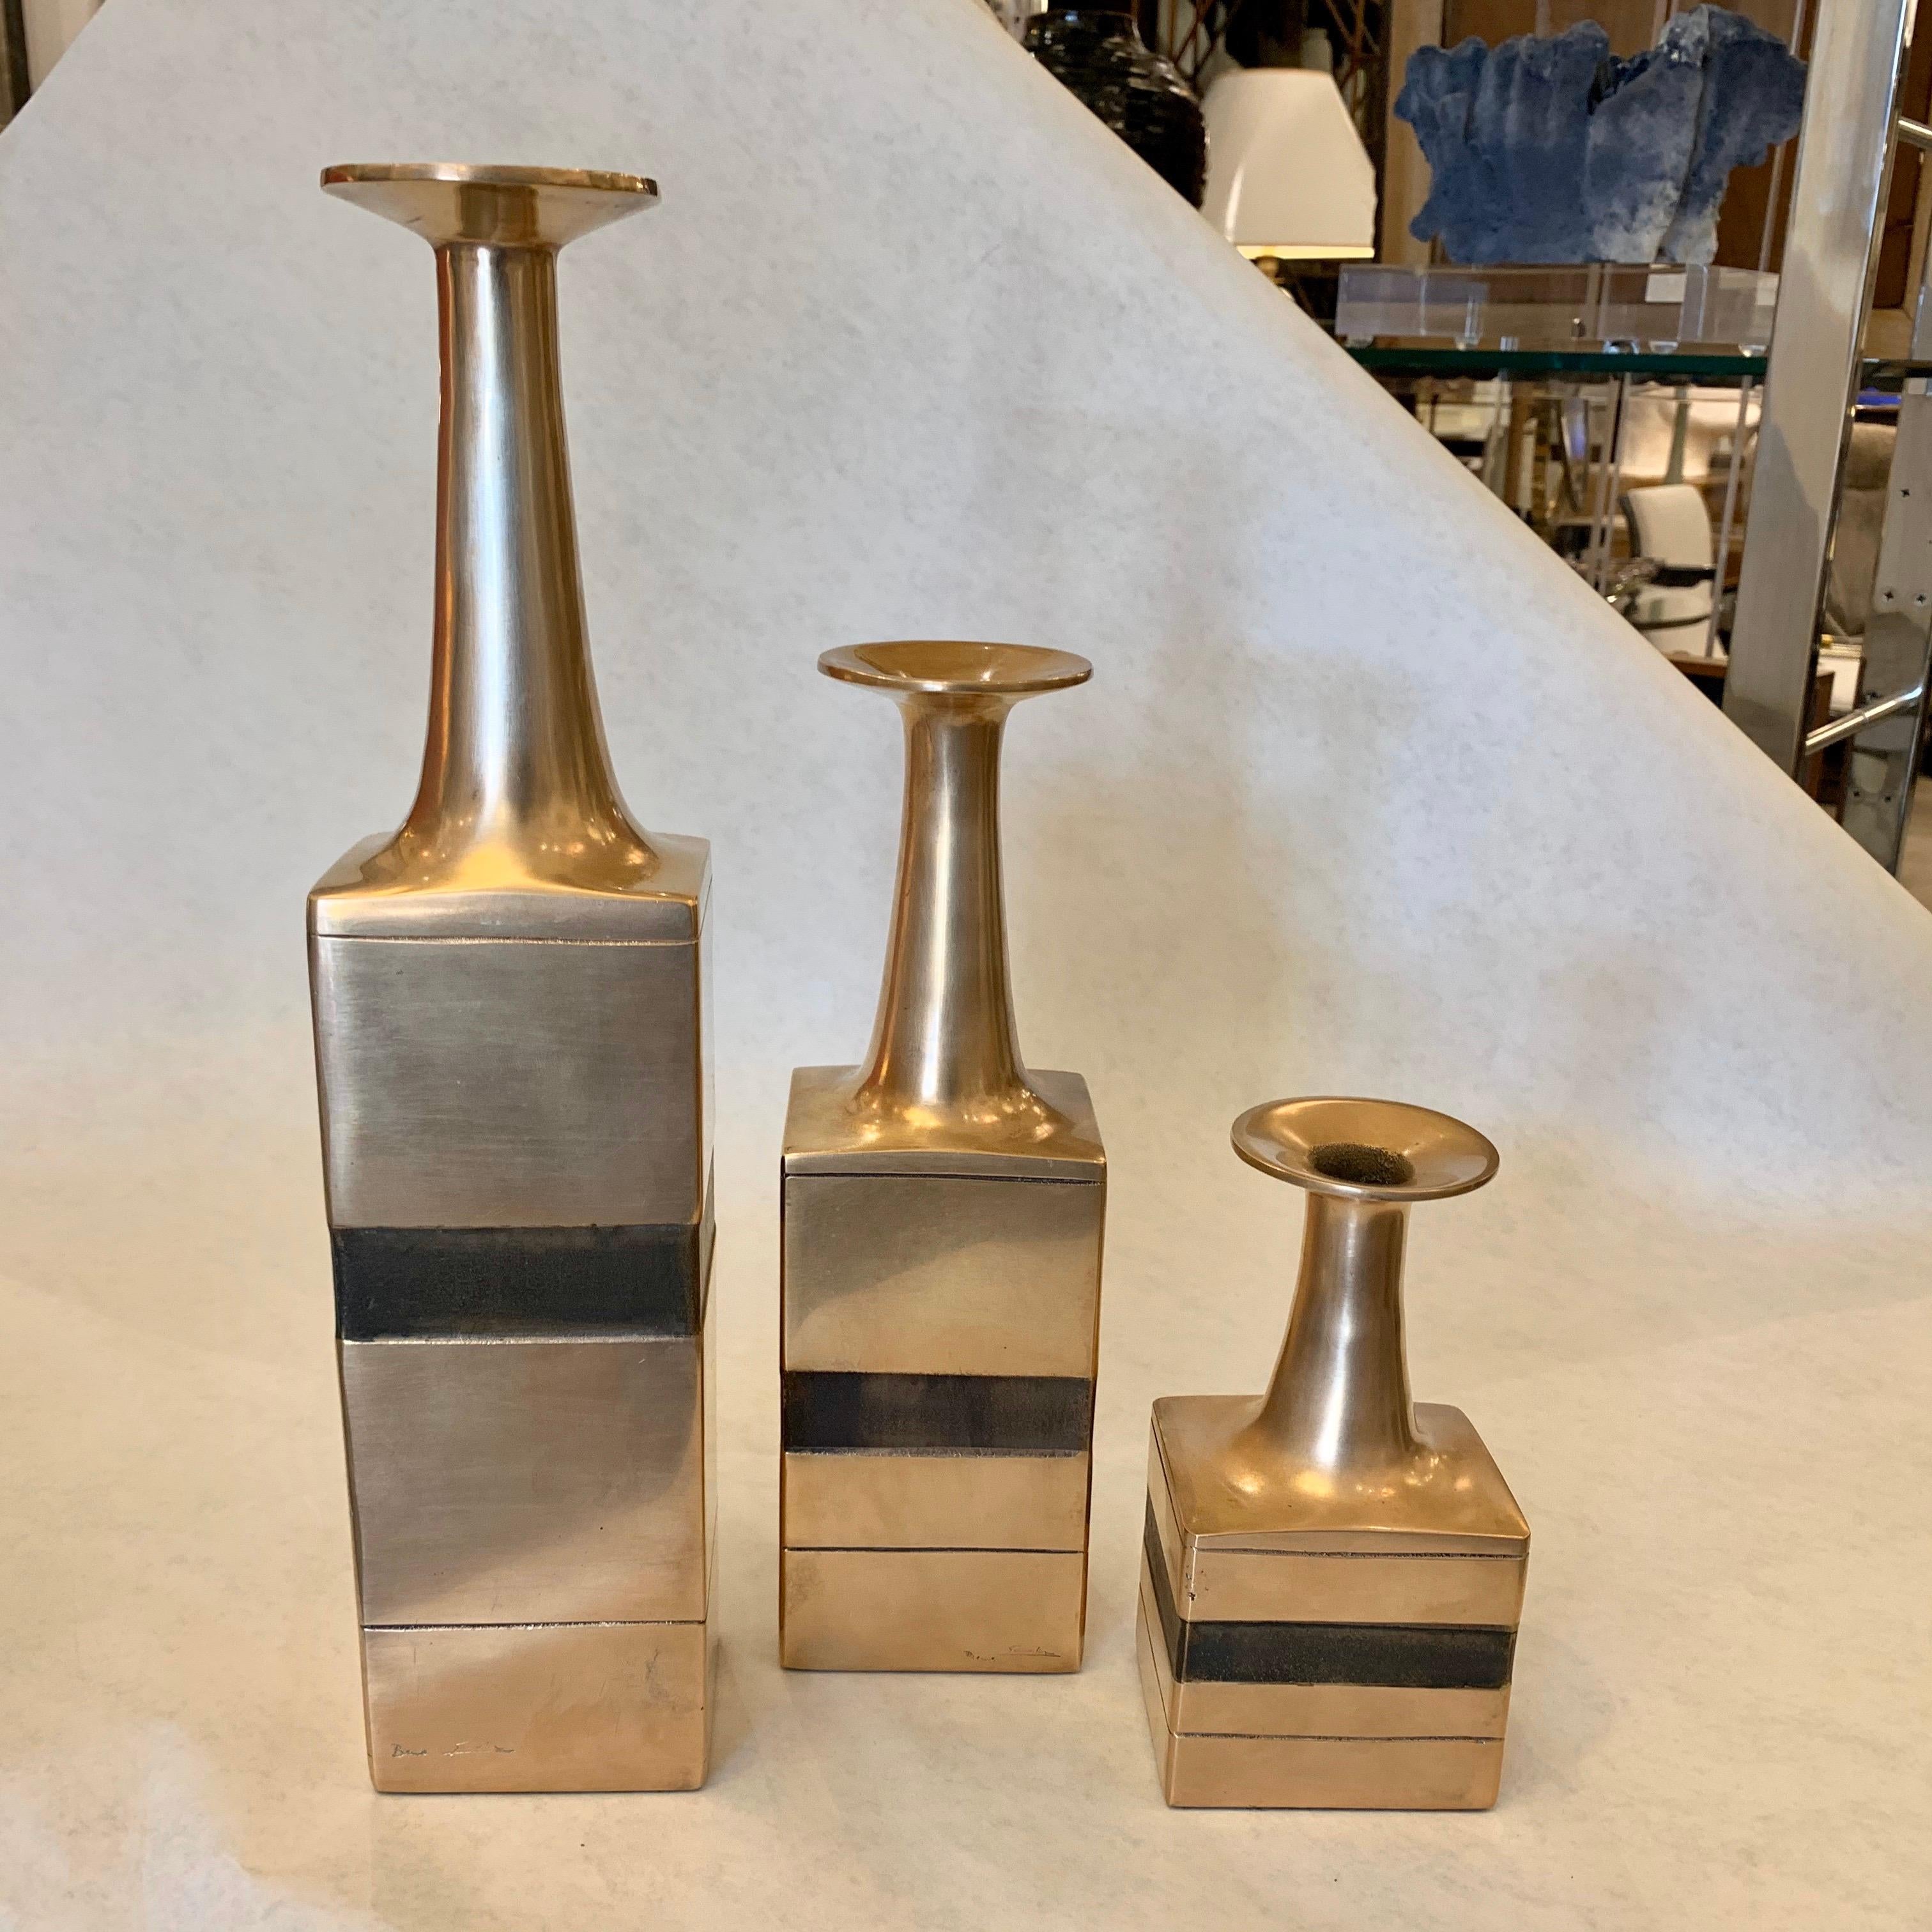 Extremely rare in set of three Gambone bronze vases; a flared opening with an elegant tapered neck ending in a solid geometrical base. Label to bottom ESART, Italy, circa 1970. These are cast and enameled bronze in descending